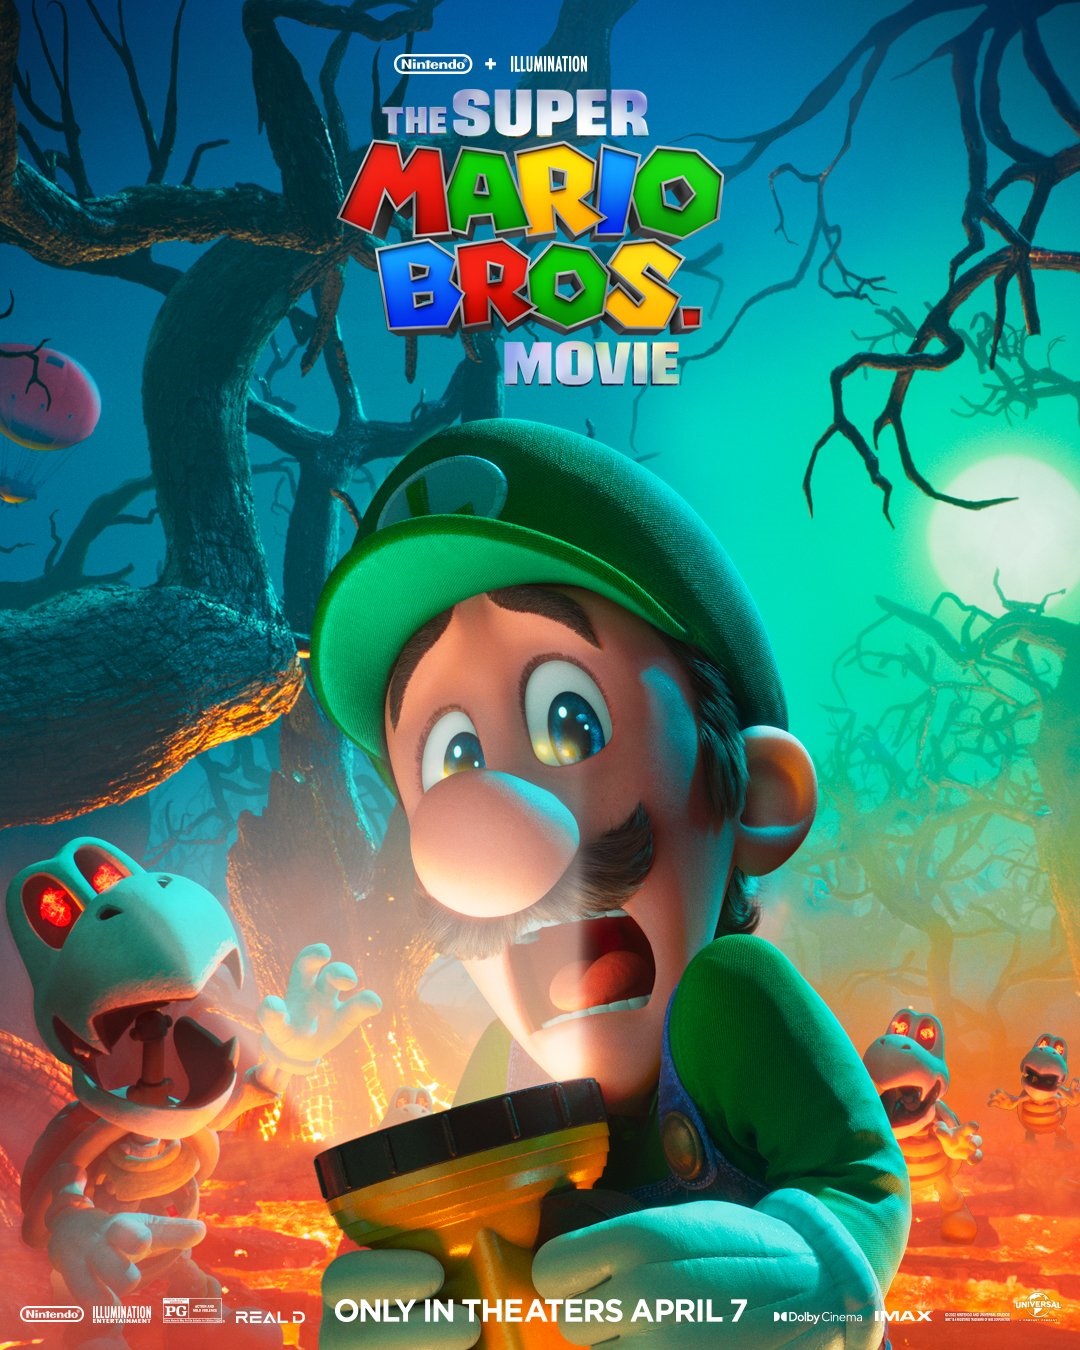 The Super Mario Bros. Movie second trailer, posters, commercial